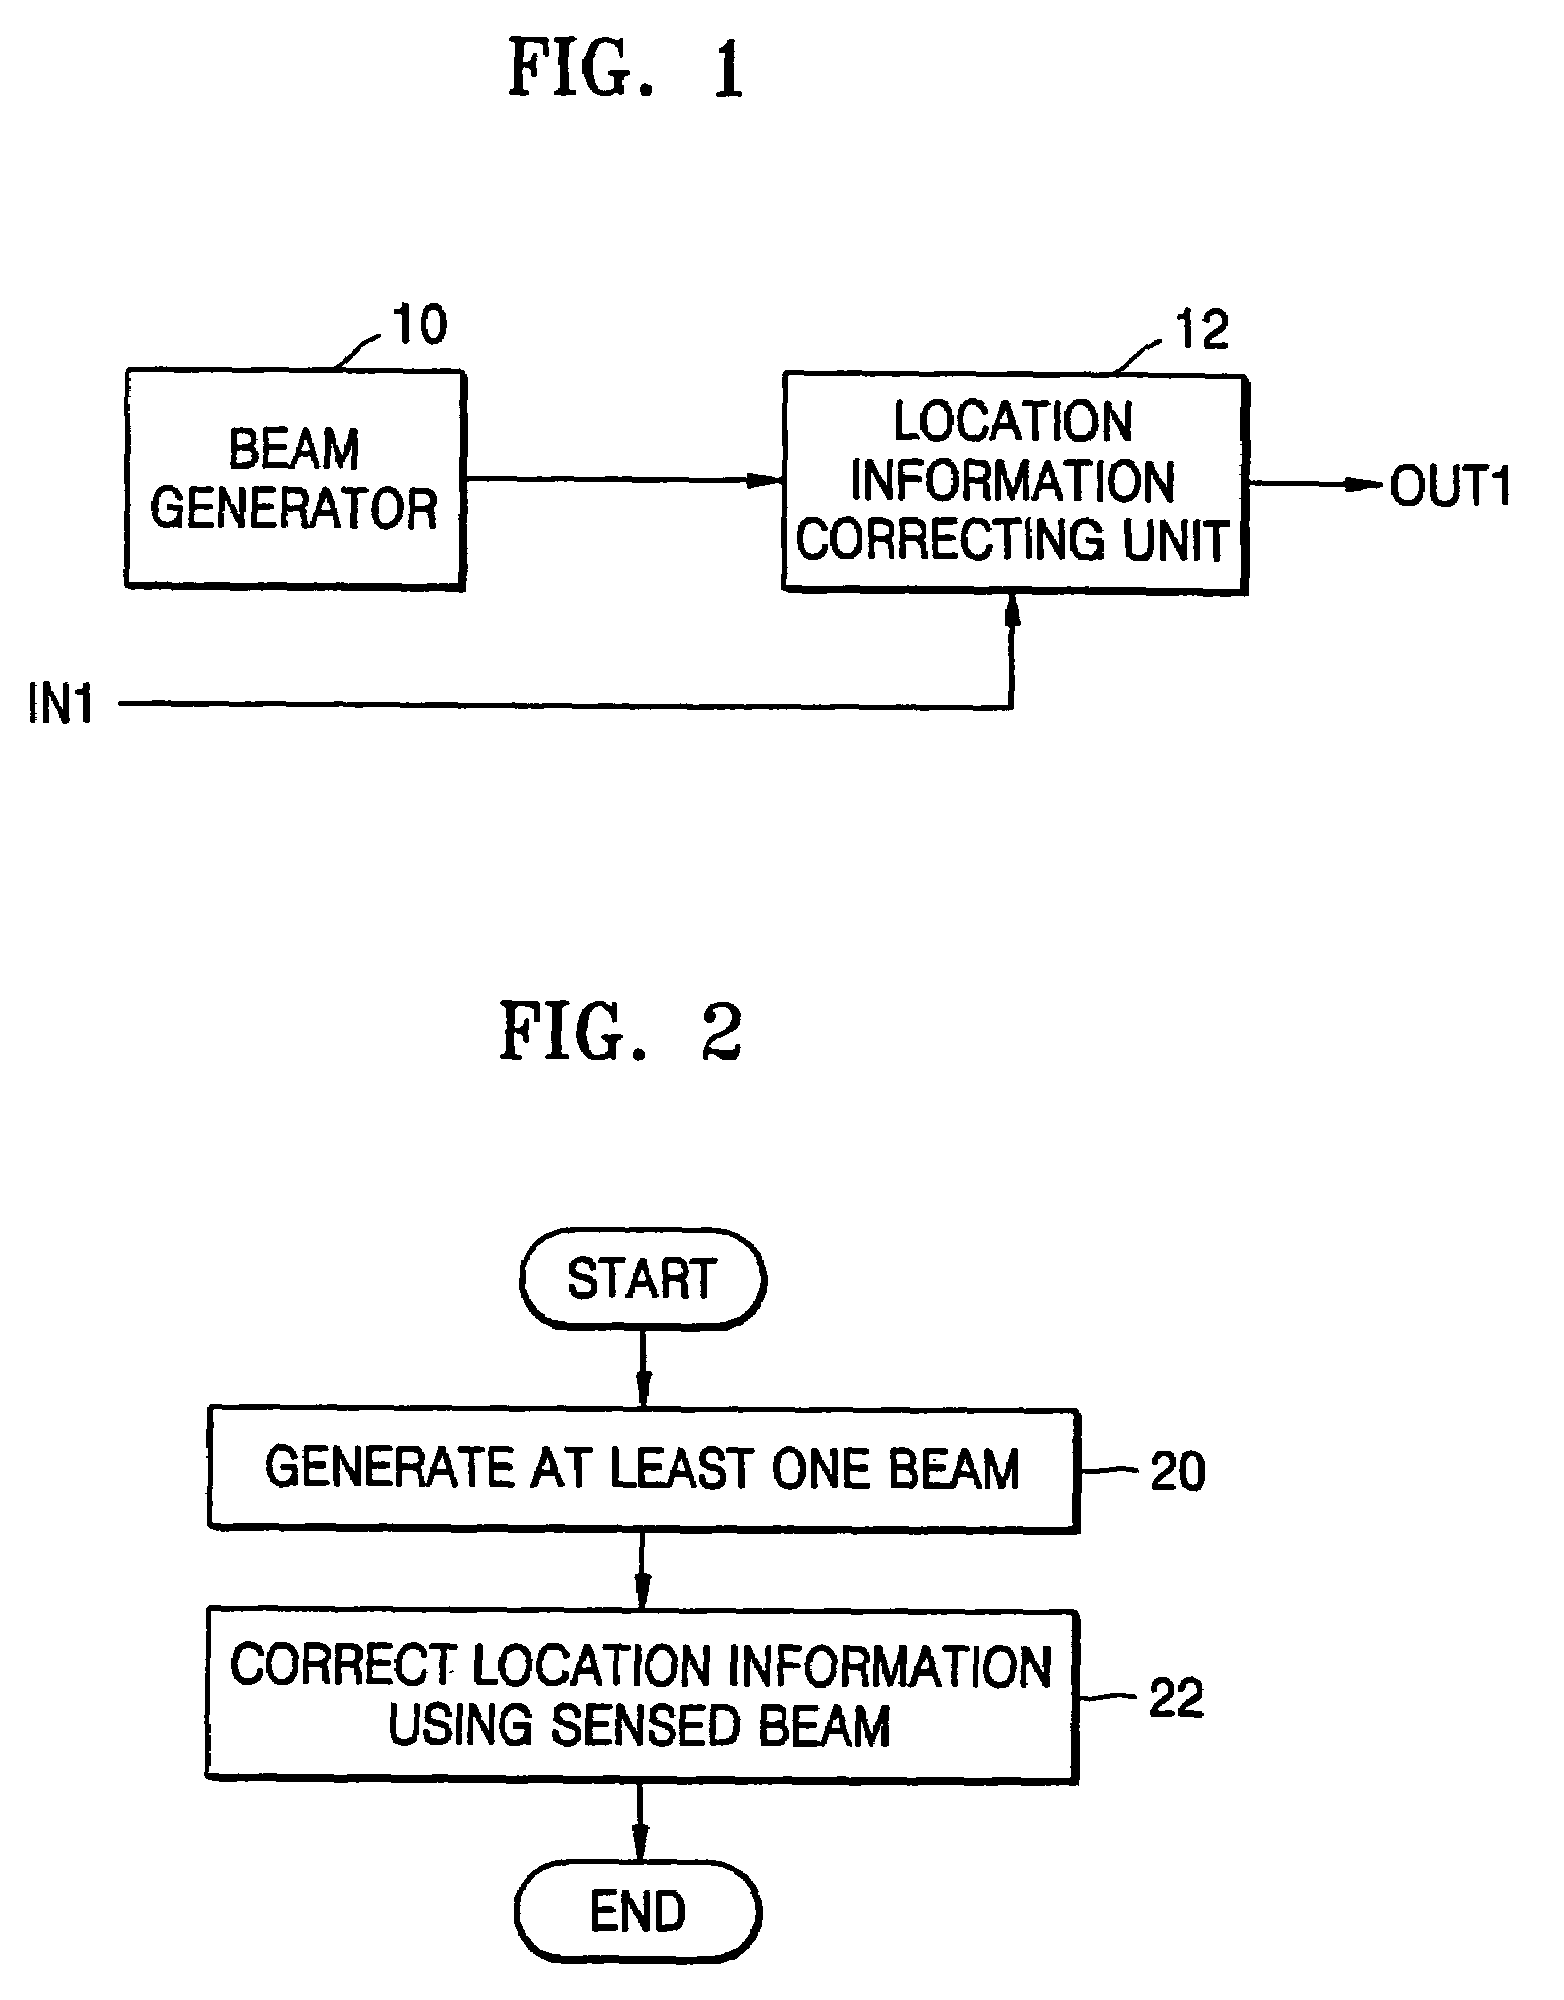 Apparatus and method for correcting location information of mobile body, and computer-readable media storing computer program for controlling the apparatus